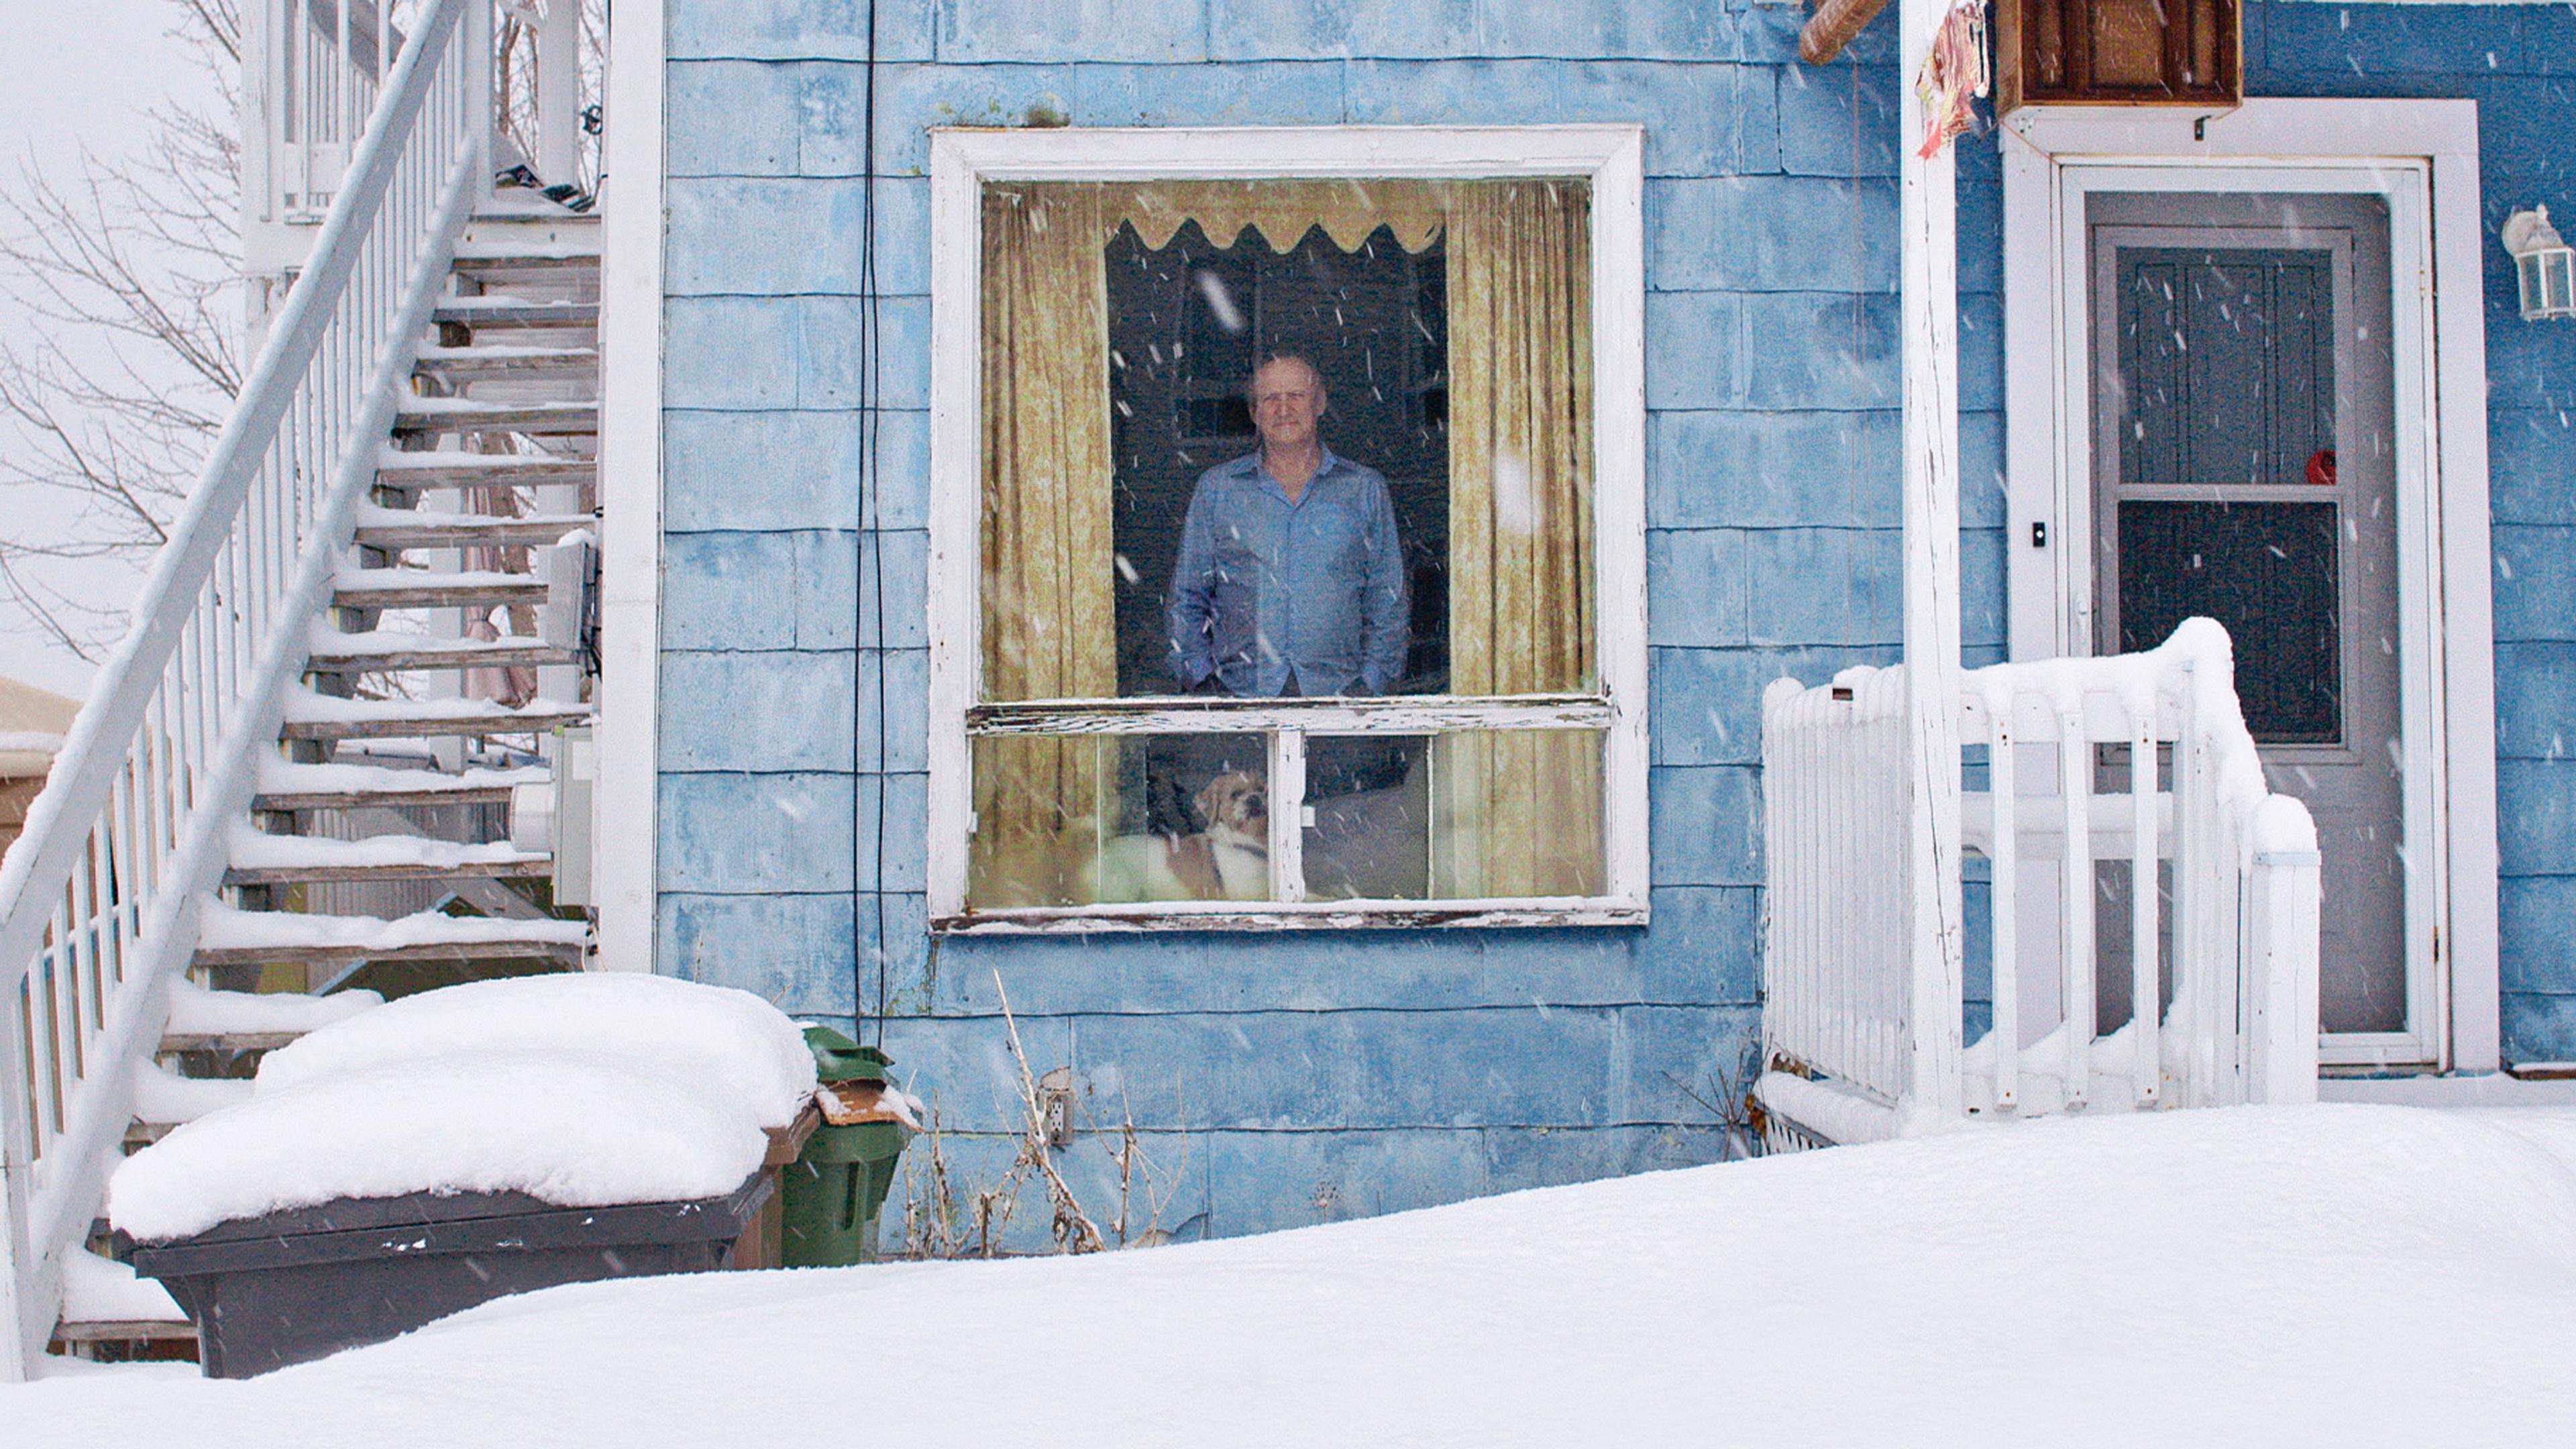 A person and a dog look out from a window of a blue house during snowfall. The house has an external staircase covered with snow on the left, and a snow-covered porch on the right. The scene is set on a snowy day, with visible accumulation on the ground and surfaces.